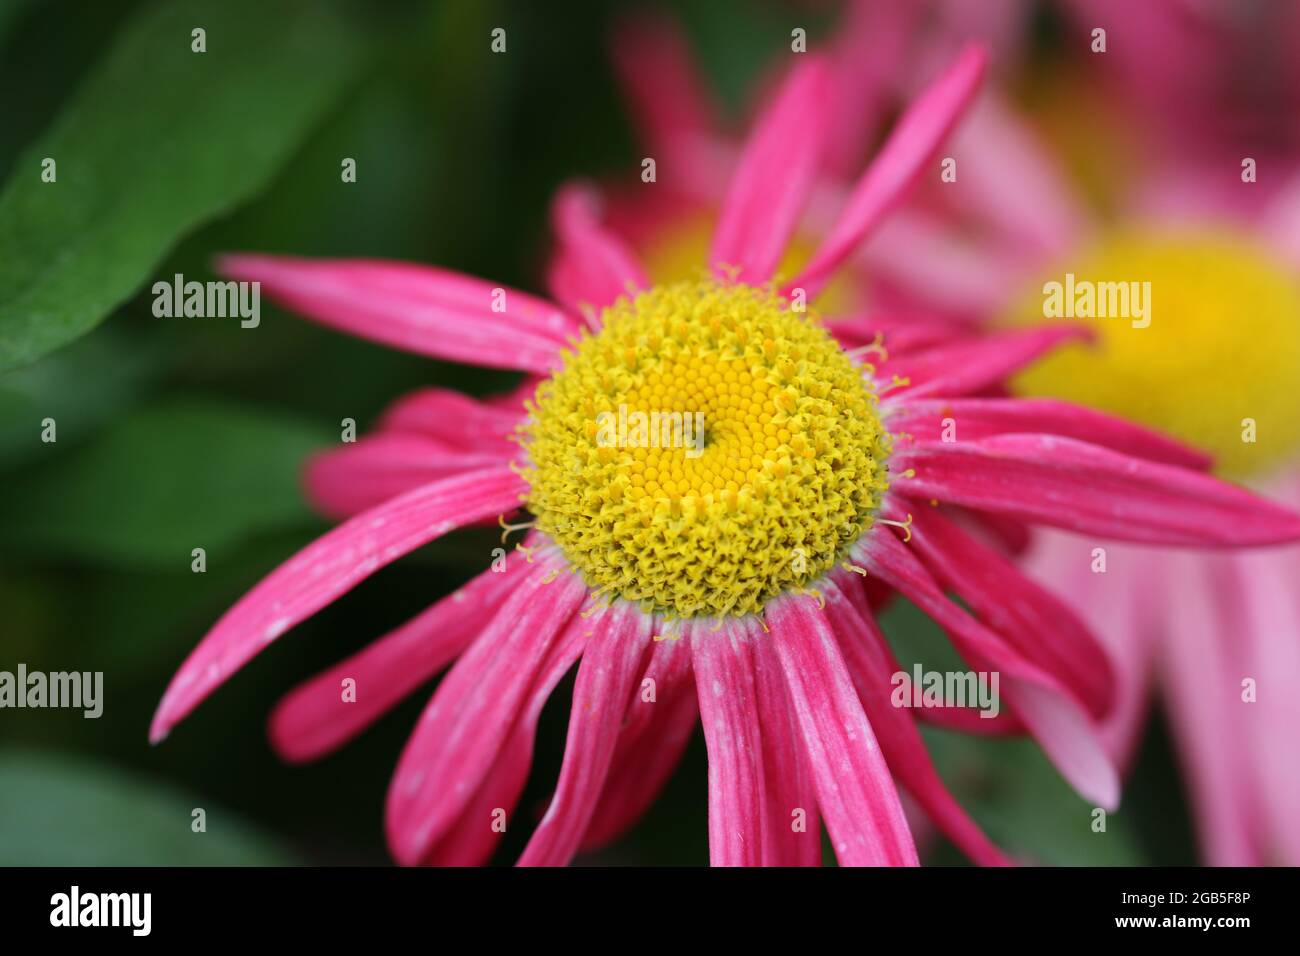 Pink painted daisy, Tanacetum coccineum variety Evenglow, flower with a yellow centre and a background of blurred leaves and flowers. Stock Photo